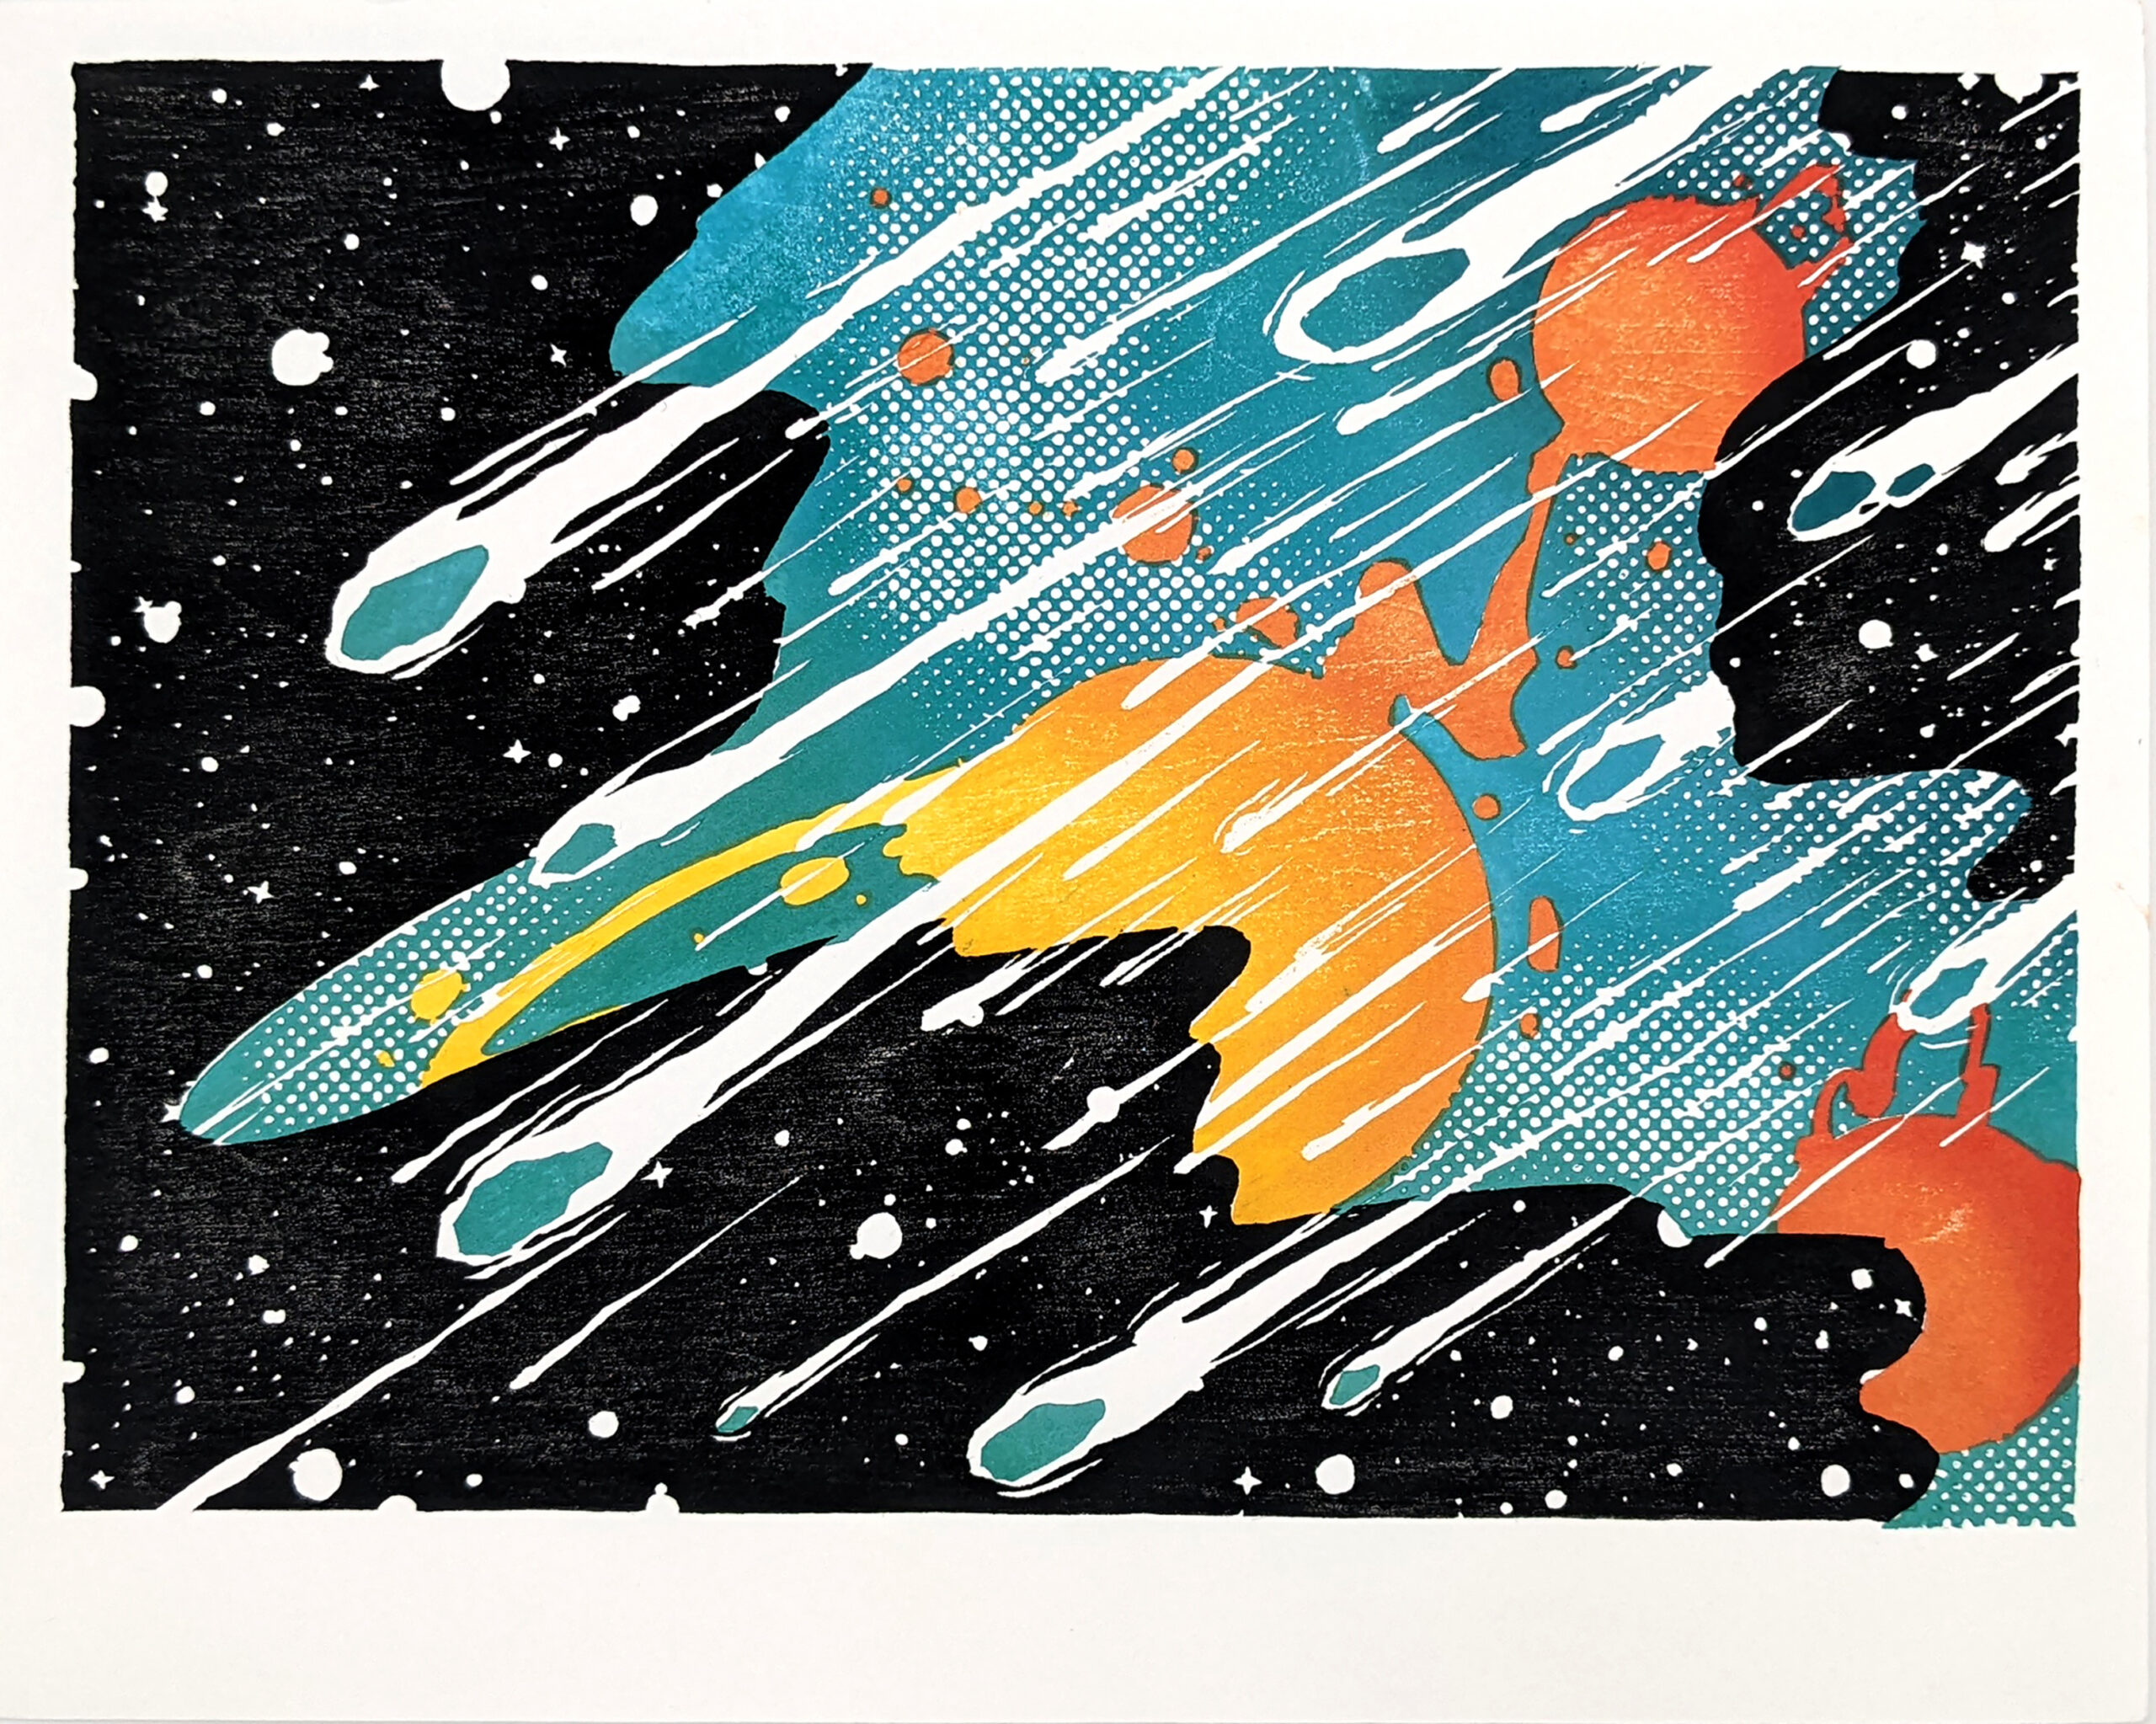 "Potential and Promise" Mokuhanga (water based wood block print). Streaking space debris splits a b&w star scape to expose a high chroma event beneath.